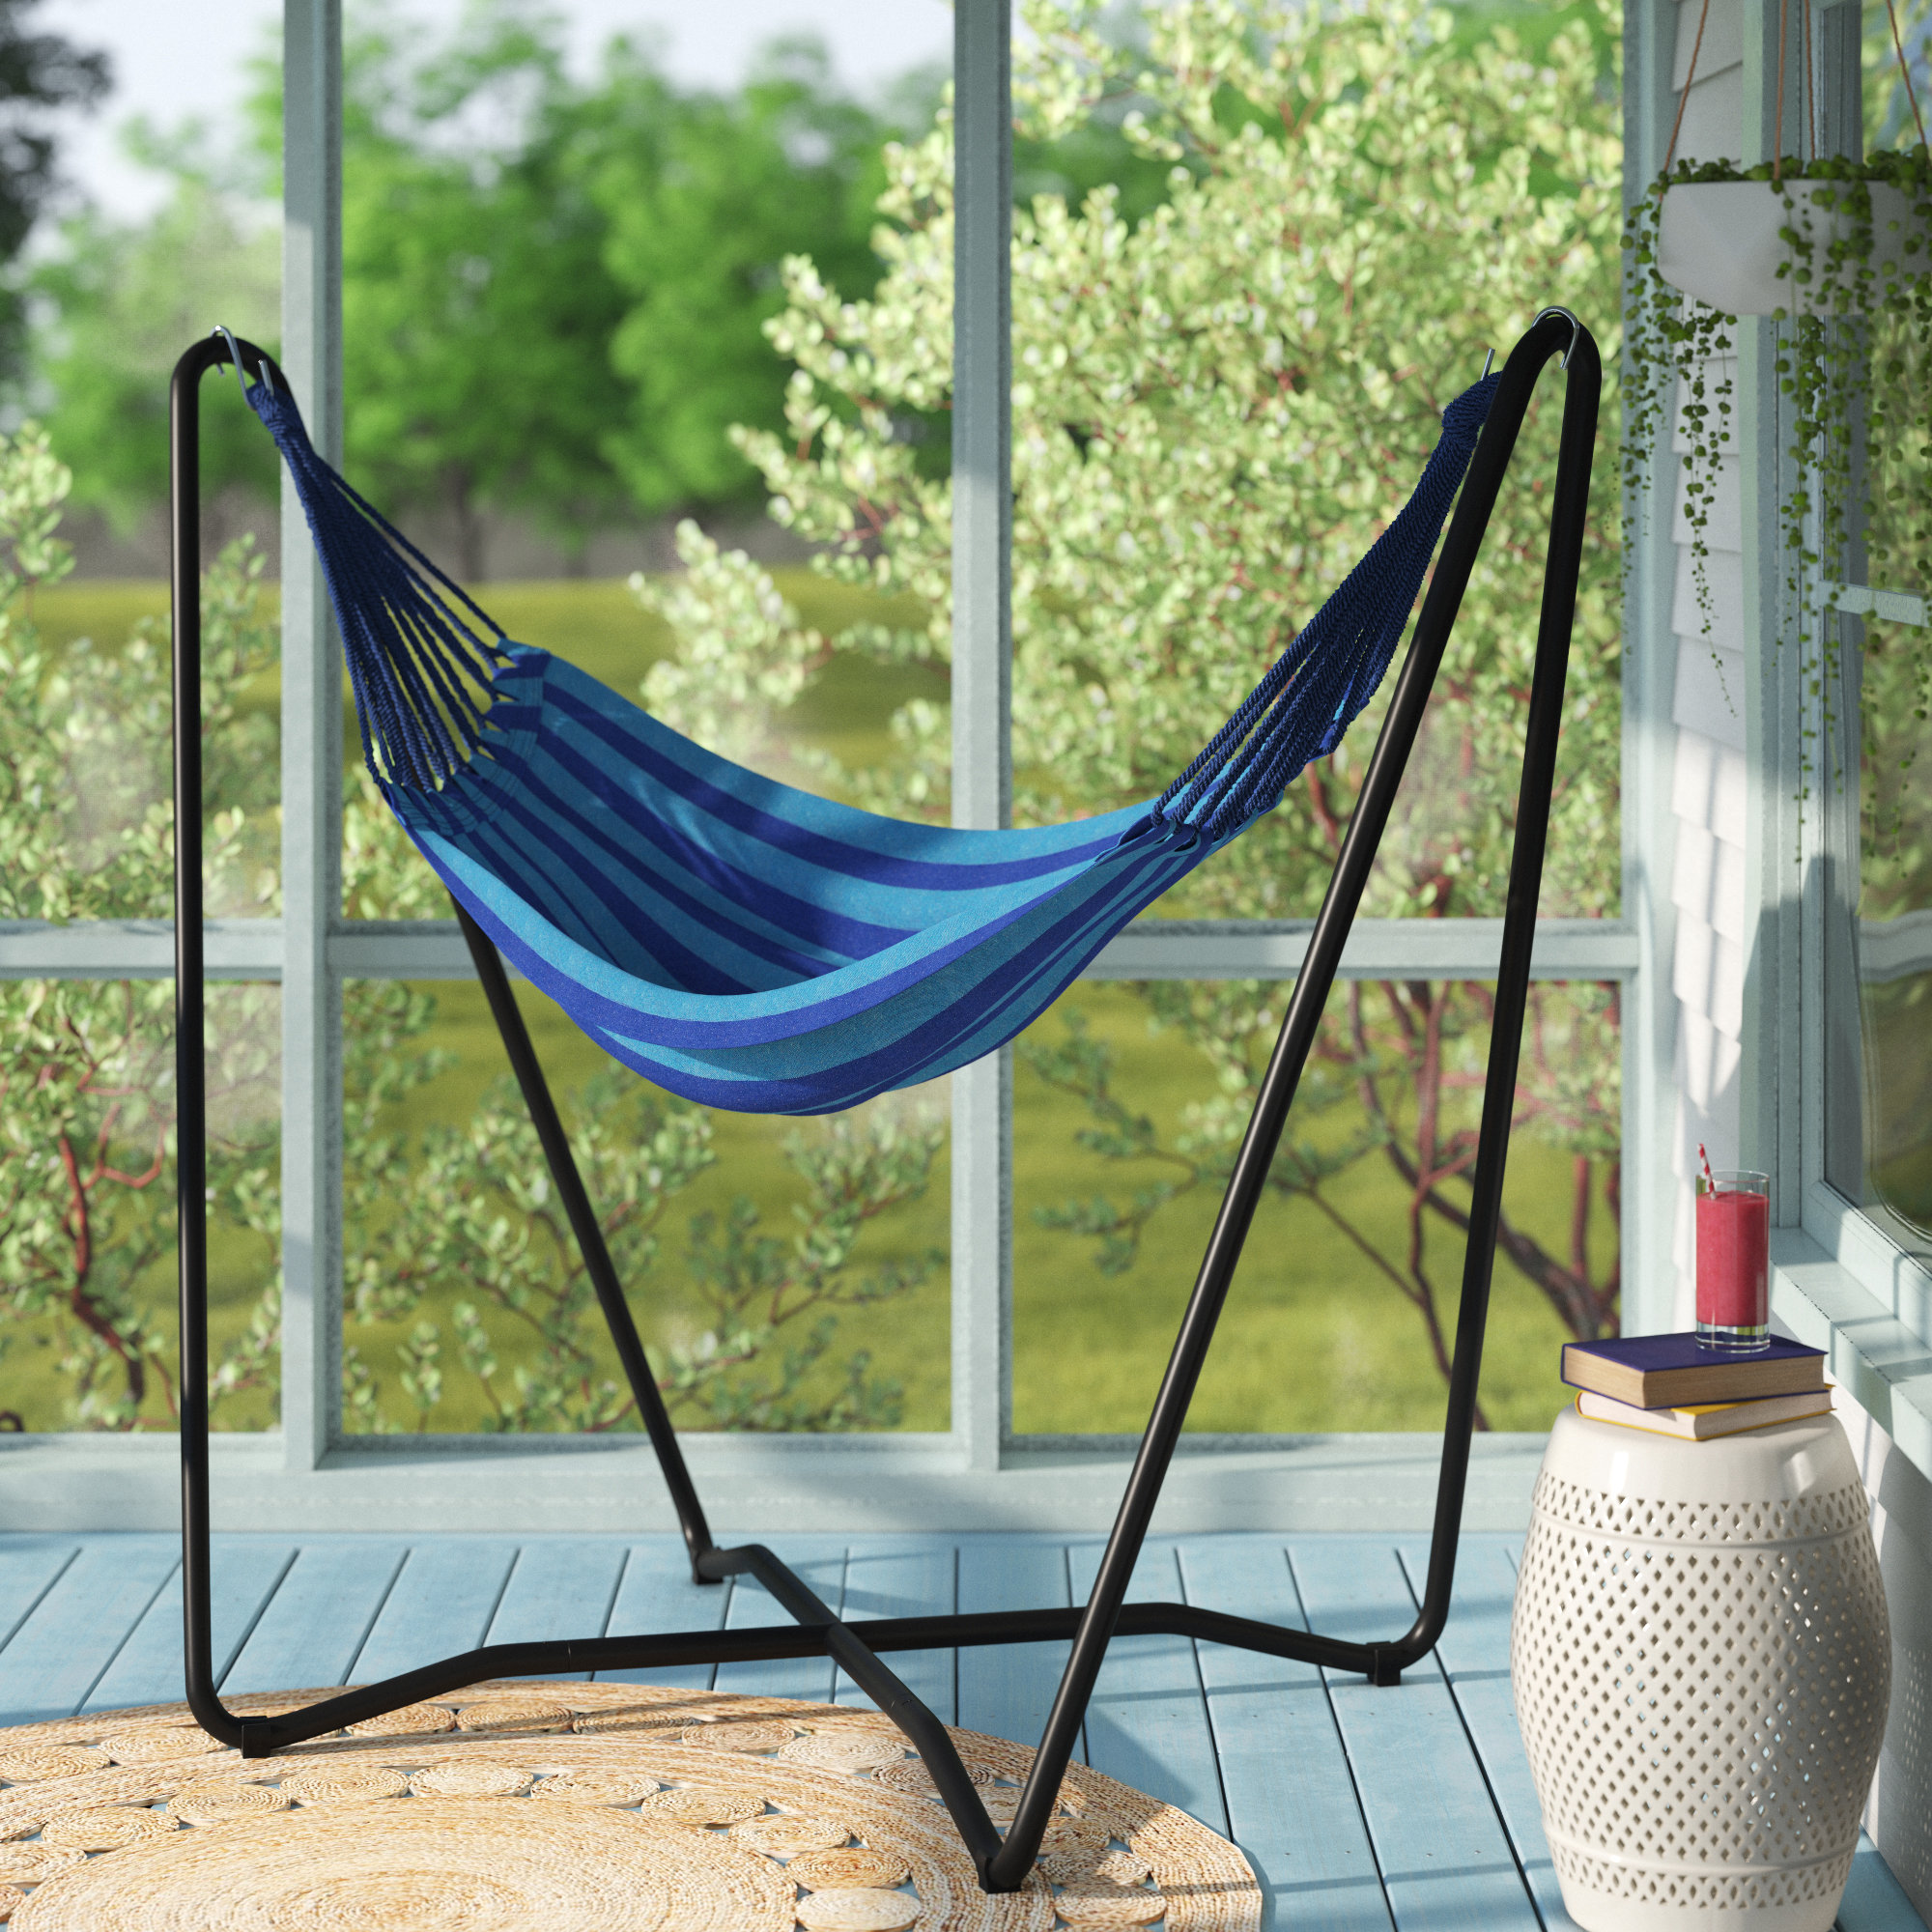 Details about  / Fast Furnishings Portable Blue Green Stripe Cotton Hammock with Metal Stand a...